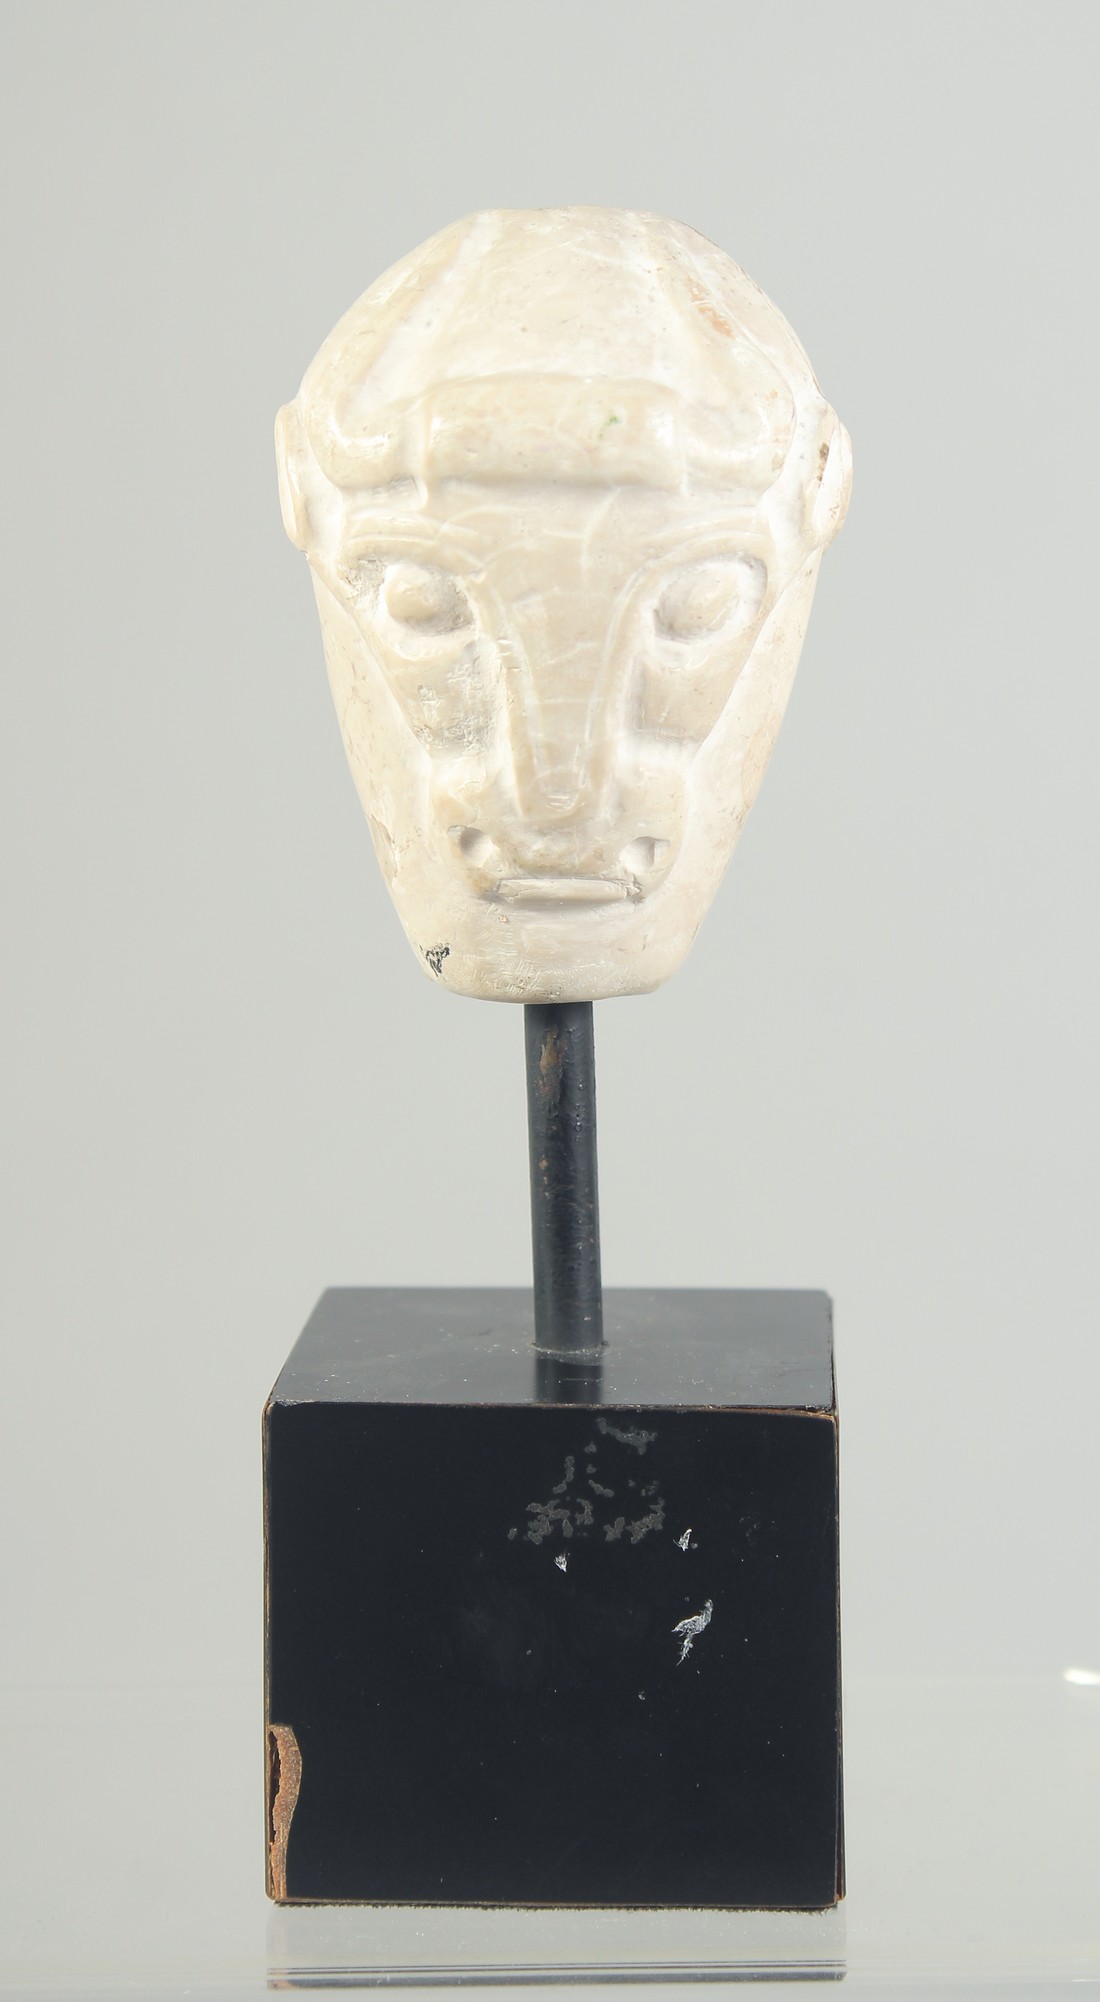 A RARE MESOPOTAMIA MASE HEAD with carved double-sided bull head, 4000 bc, raised on a purpose-made